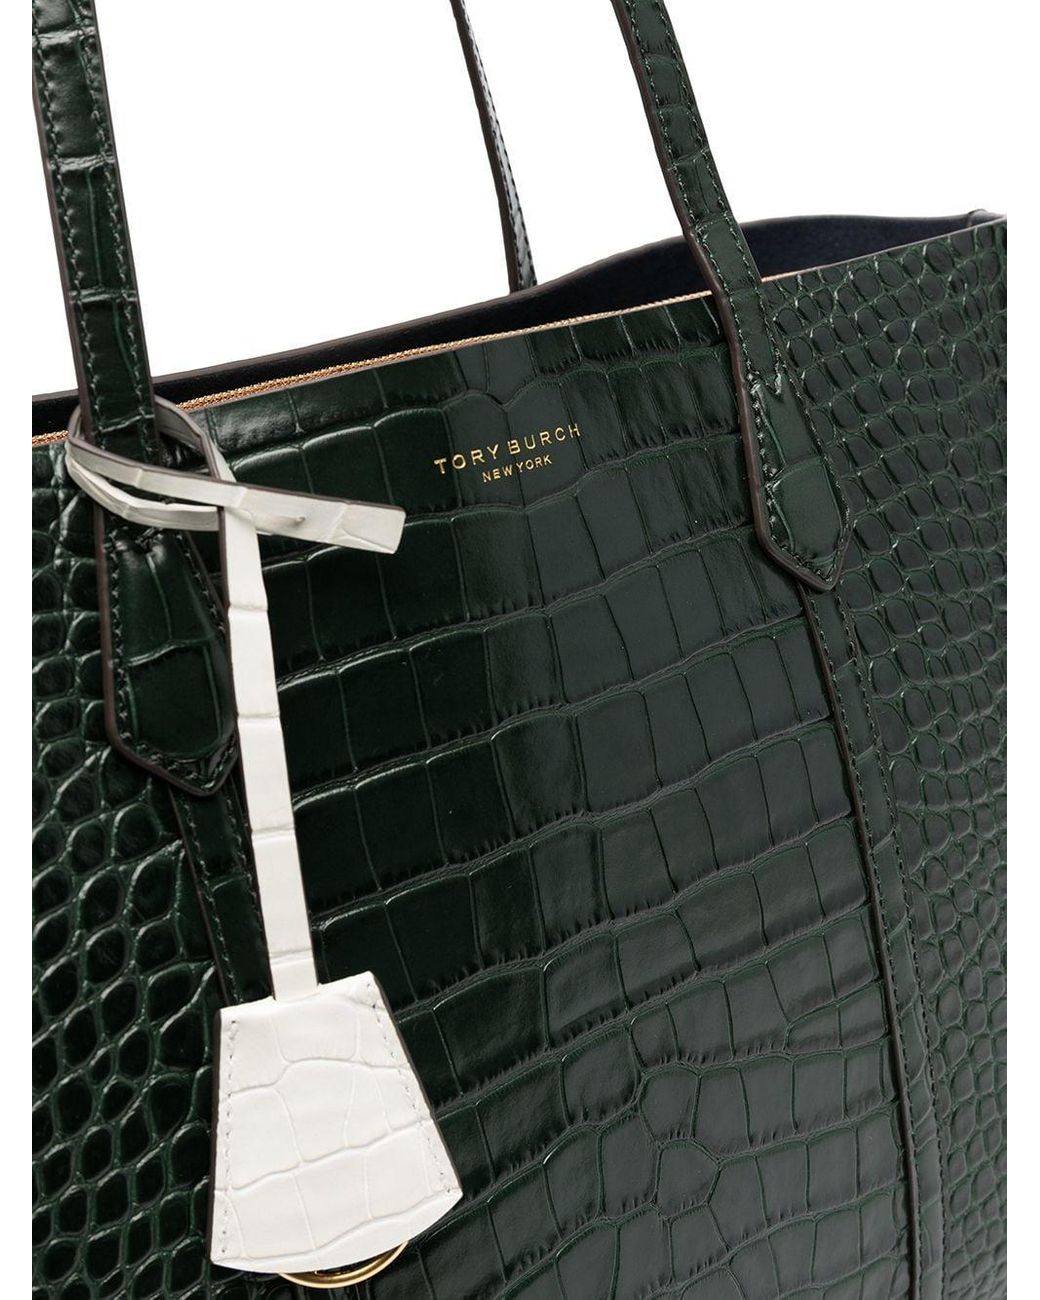 Tory Burch Leather Perry Embossed Tote Bag in Green | Lyst